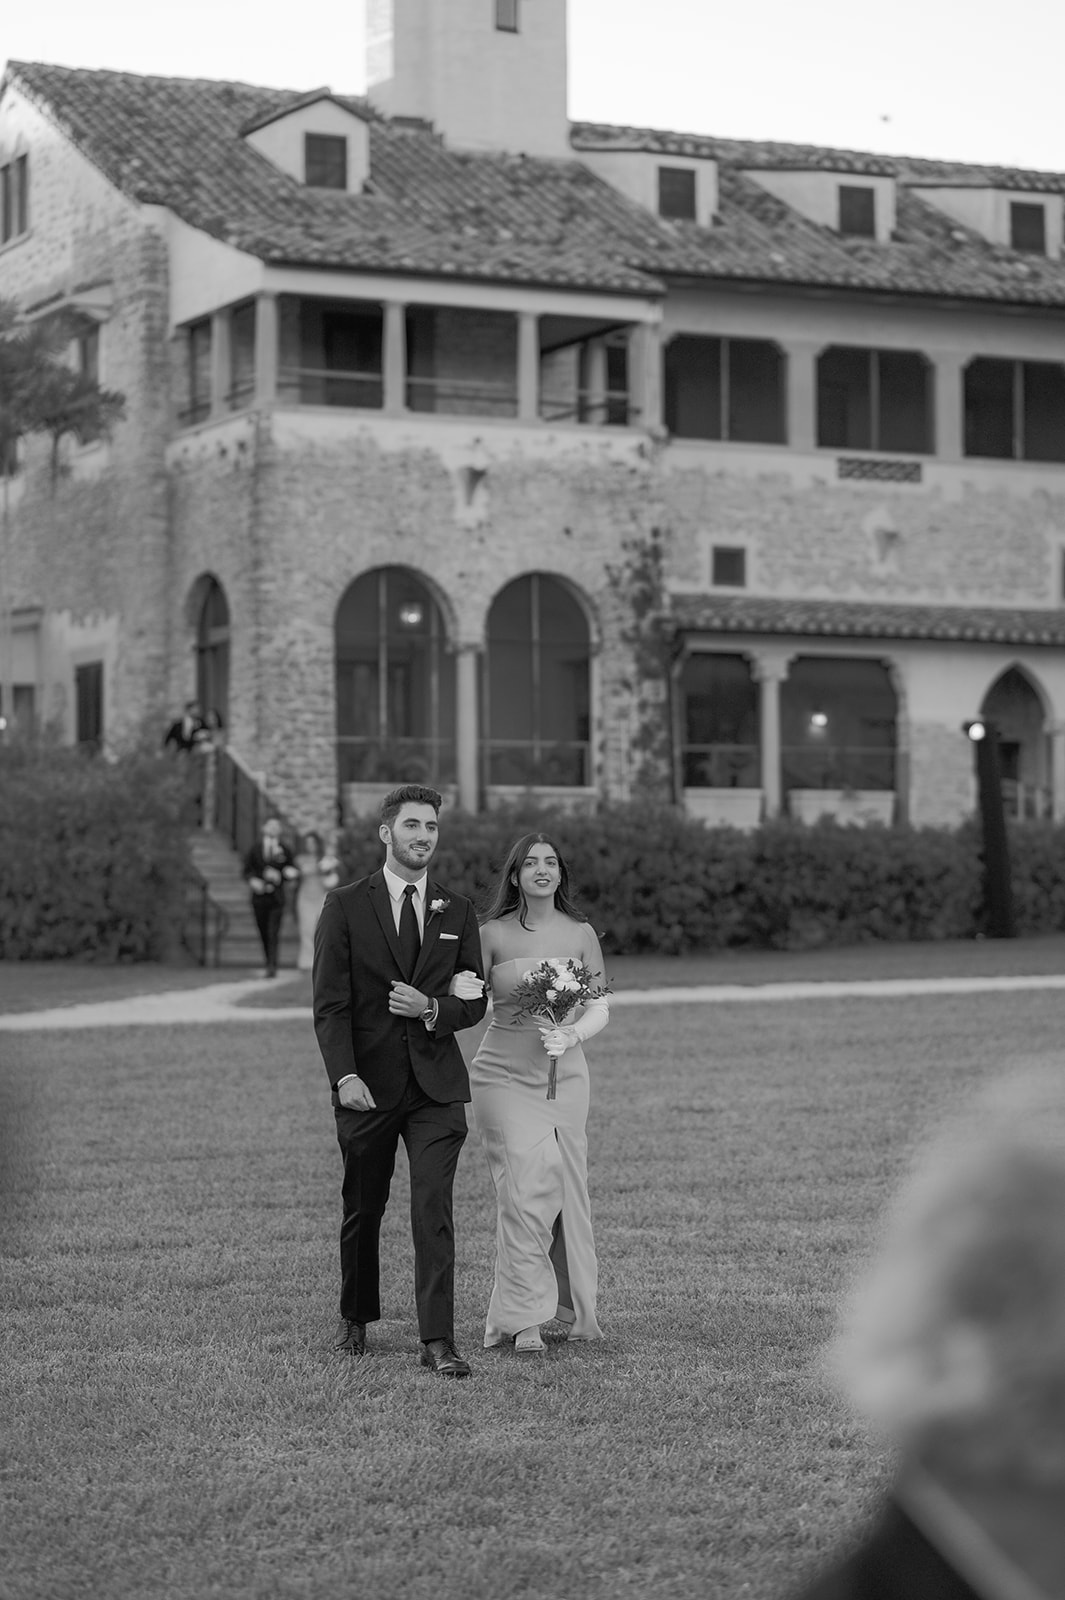 Deering Estate Wedding Photography that tells a beautiful love story
